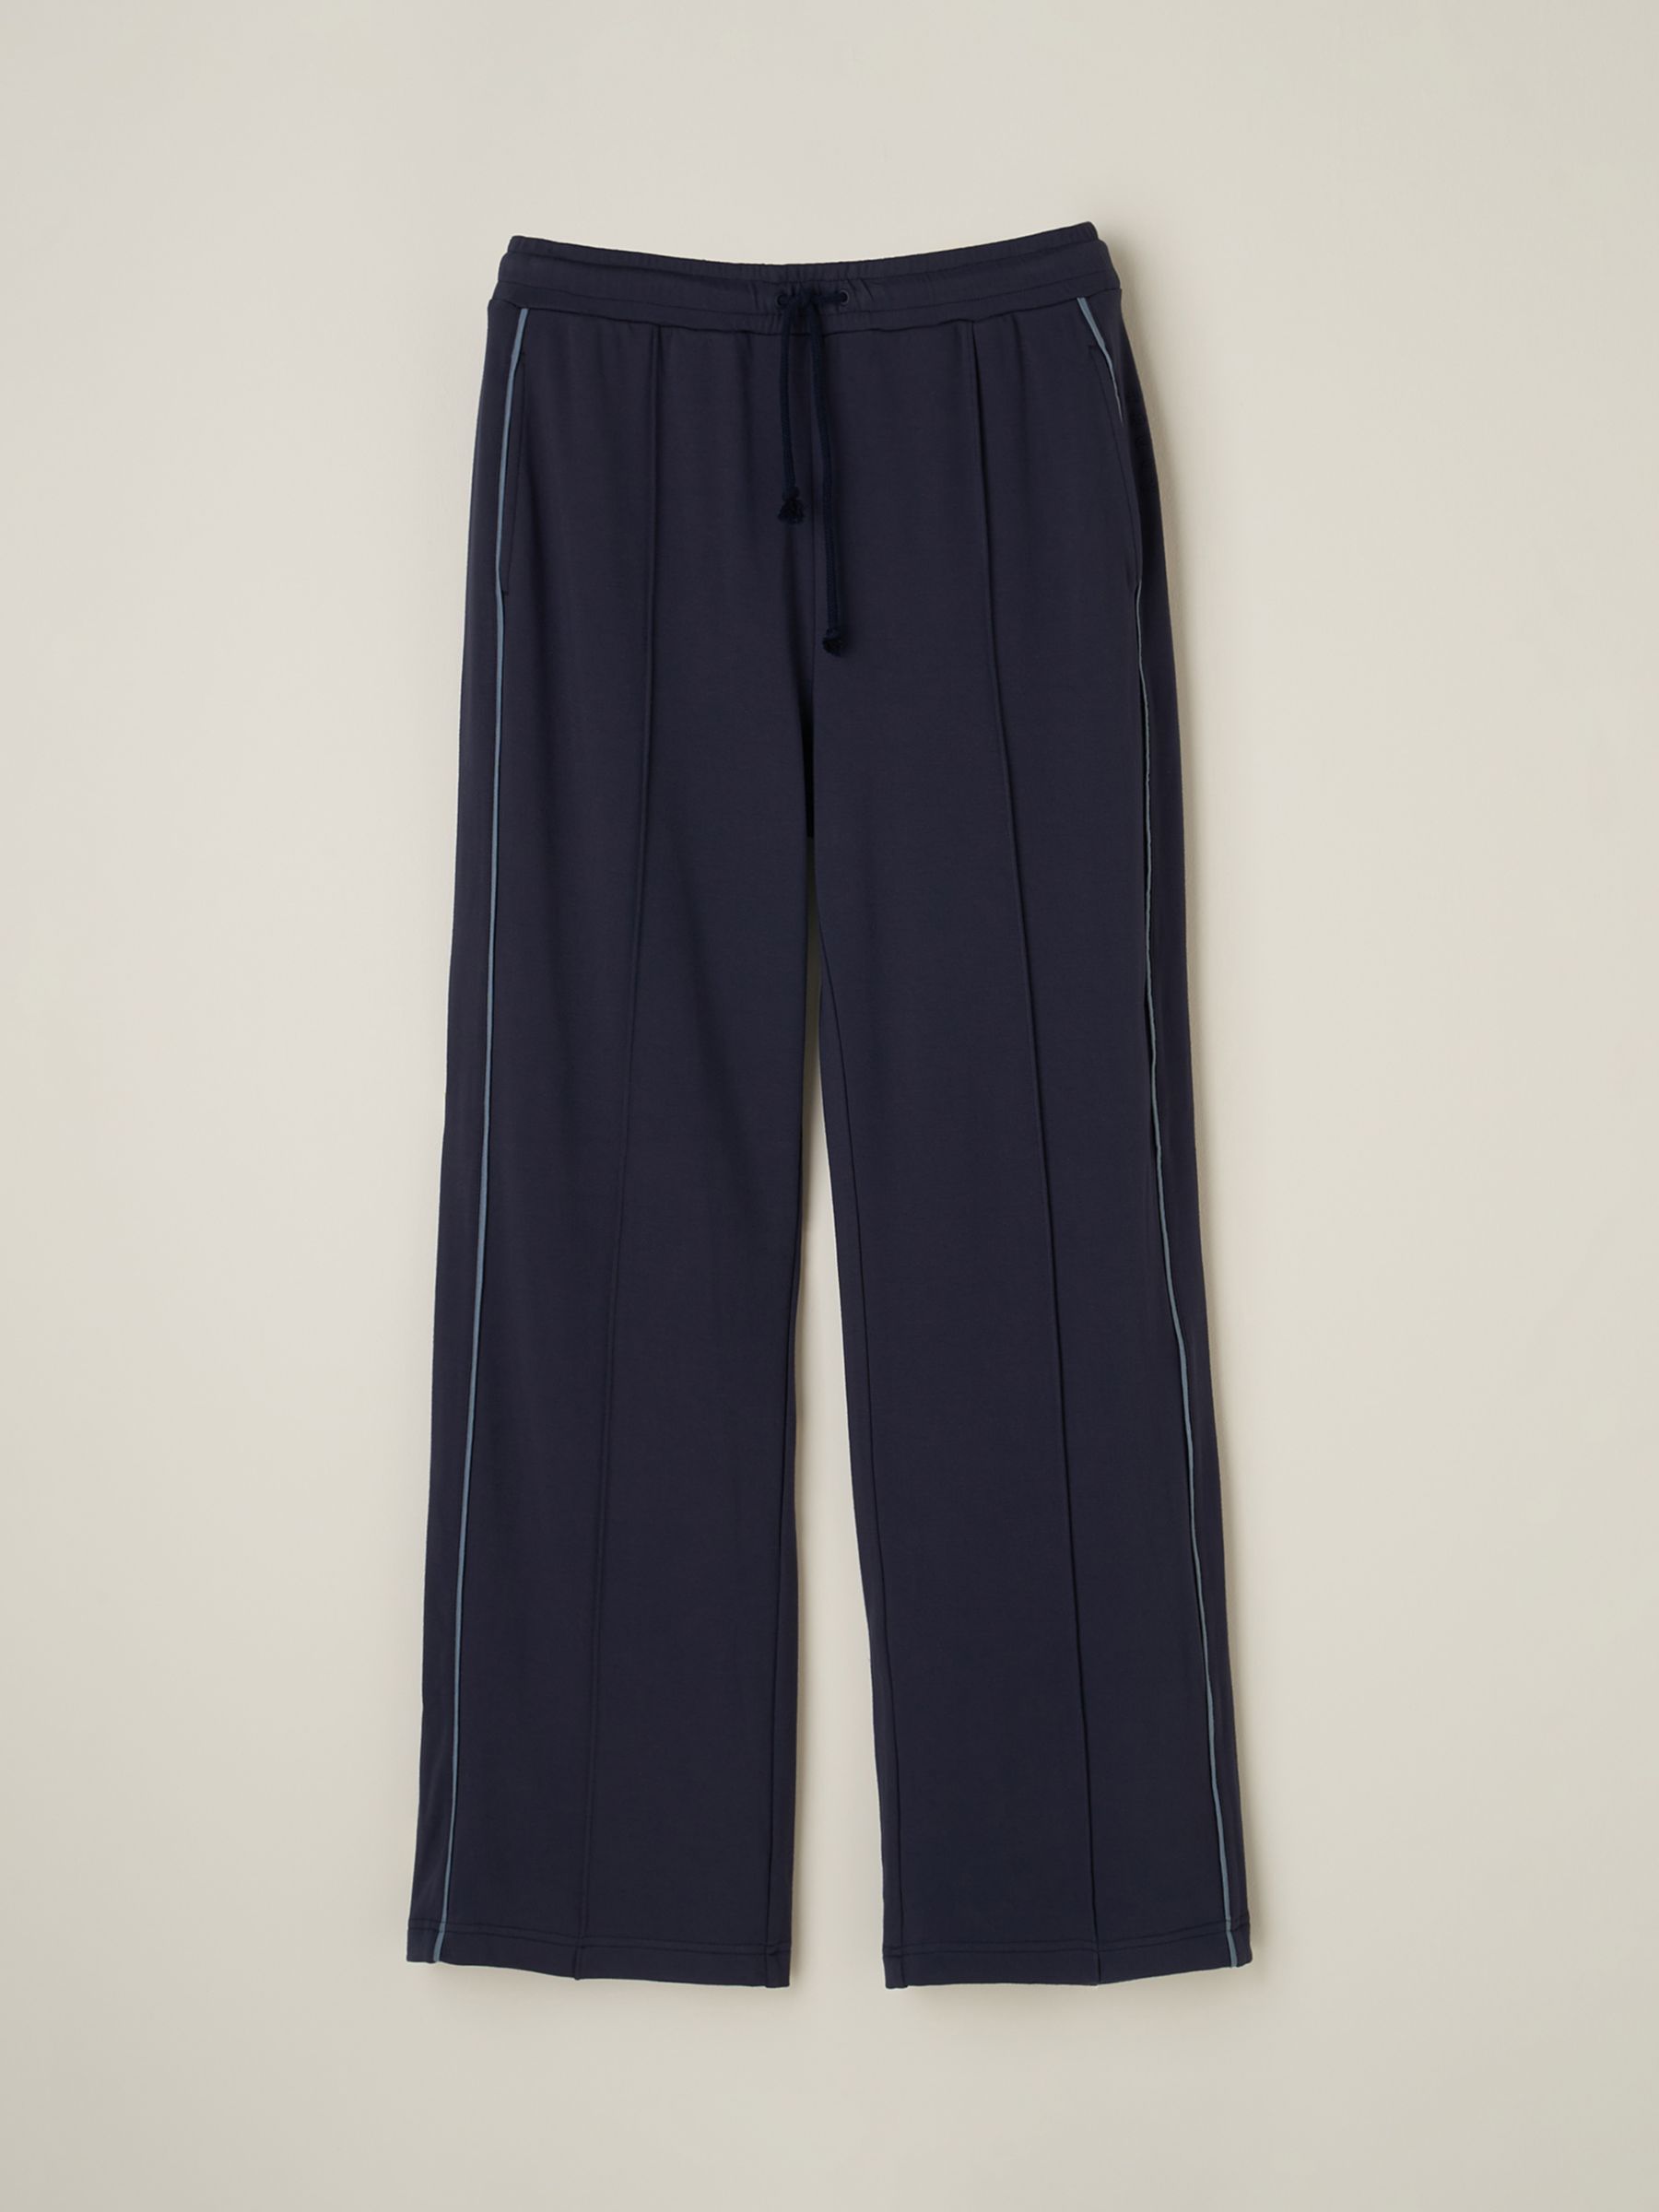 Buy Truly Side Stripe Wide Leg Joggers Online at johnlewis.com